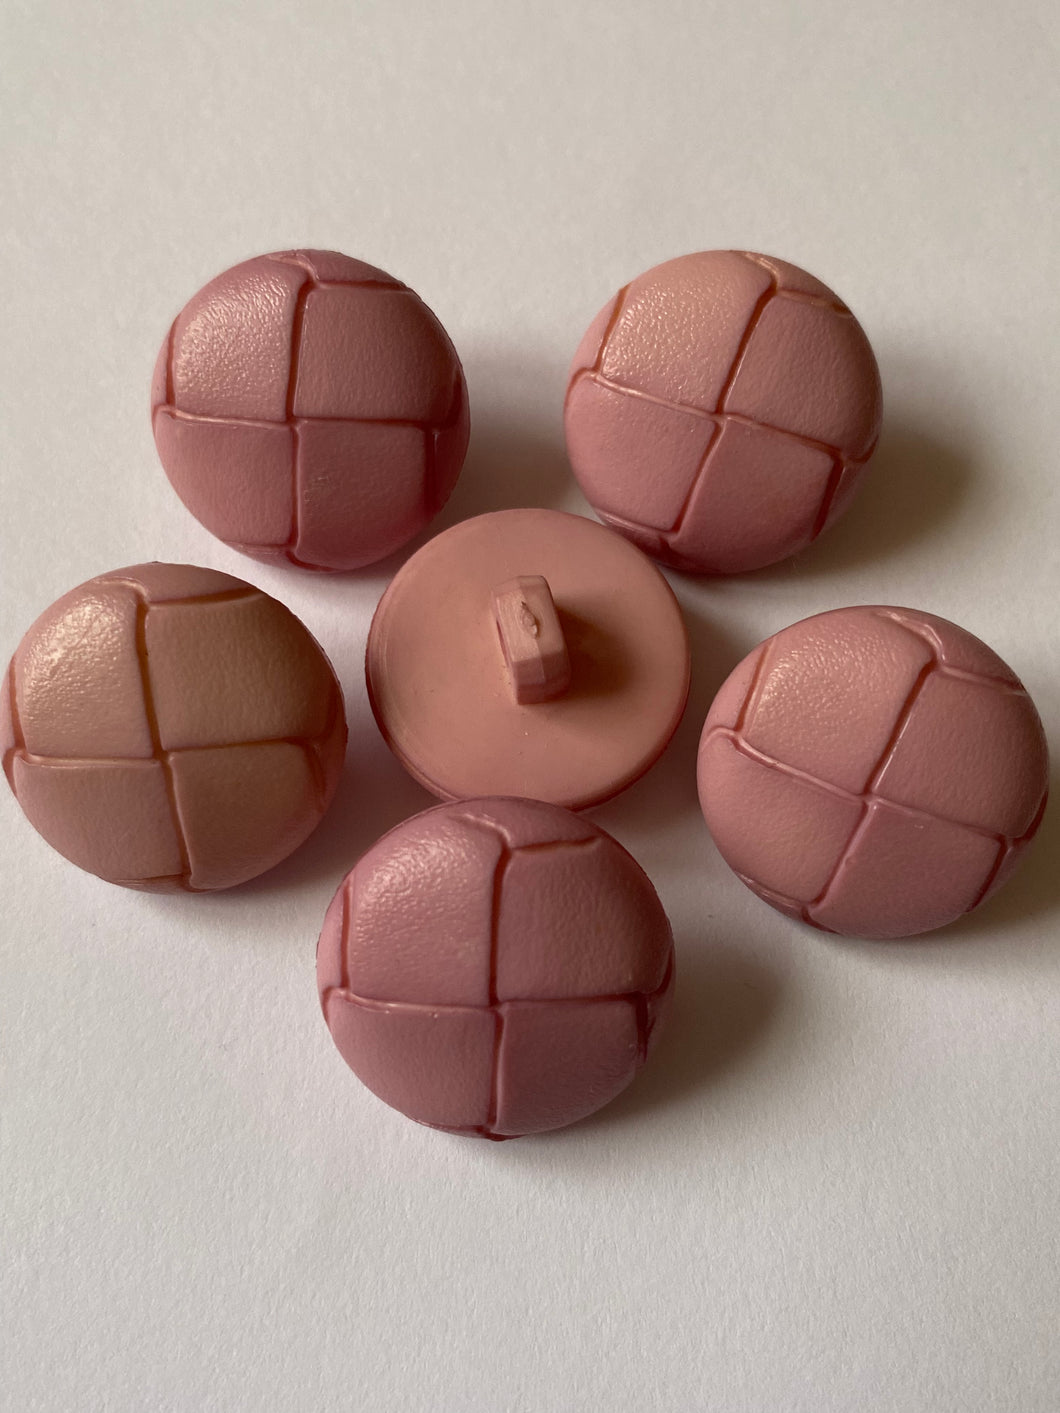 1 PINK LEATHER FOOTBALL Look Alike Shank Buttons 20mm Wide Dresses Tops Coats Babies Blazers Shirt Sewing Craft